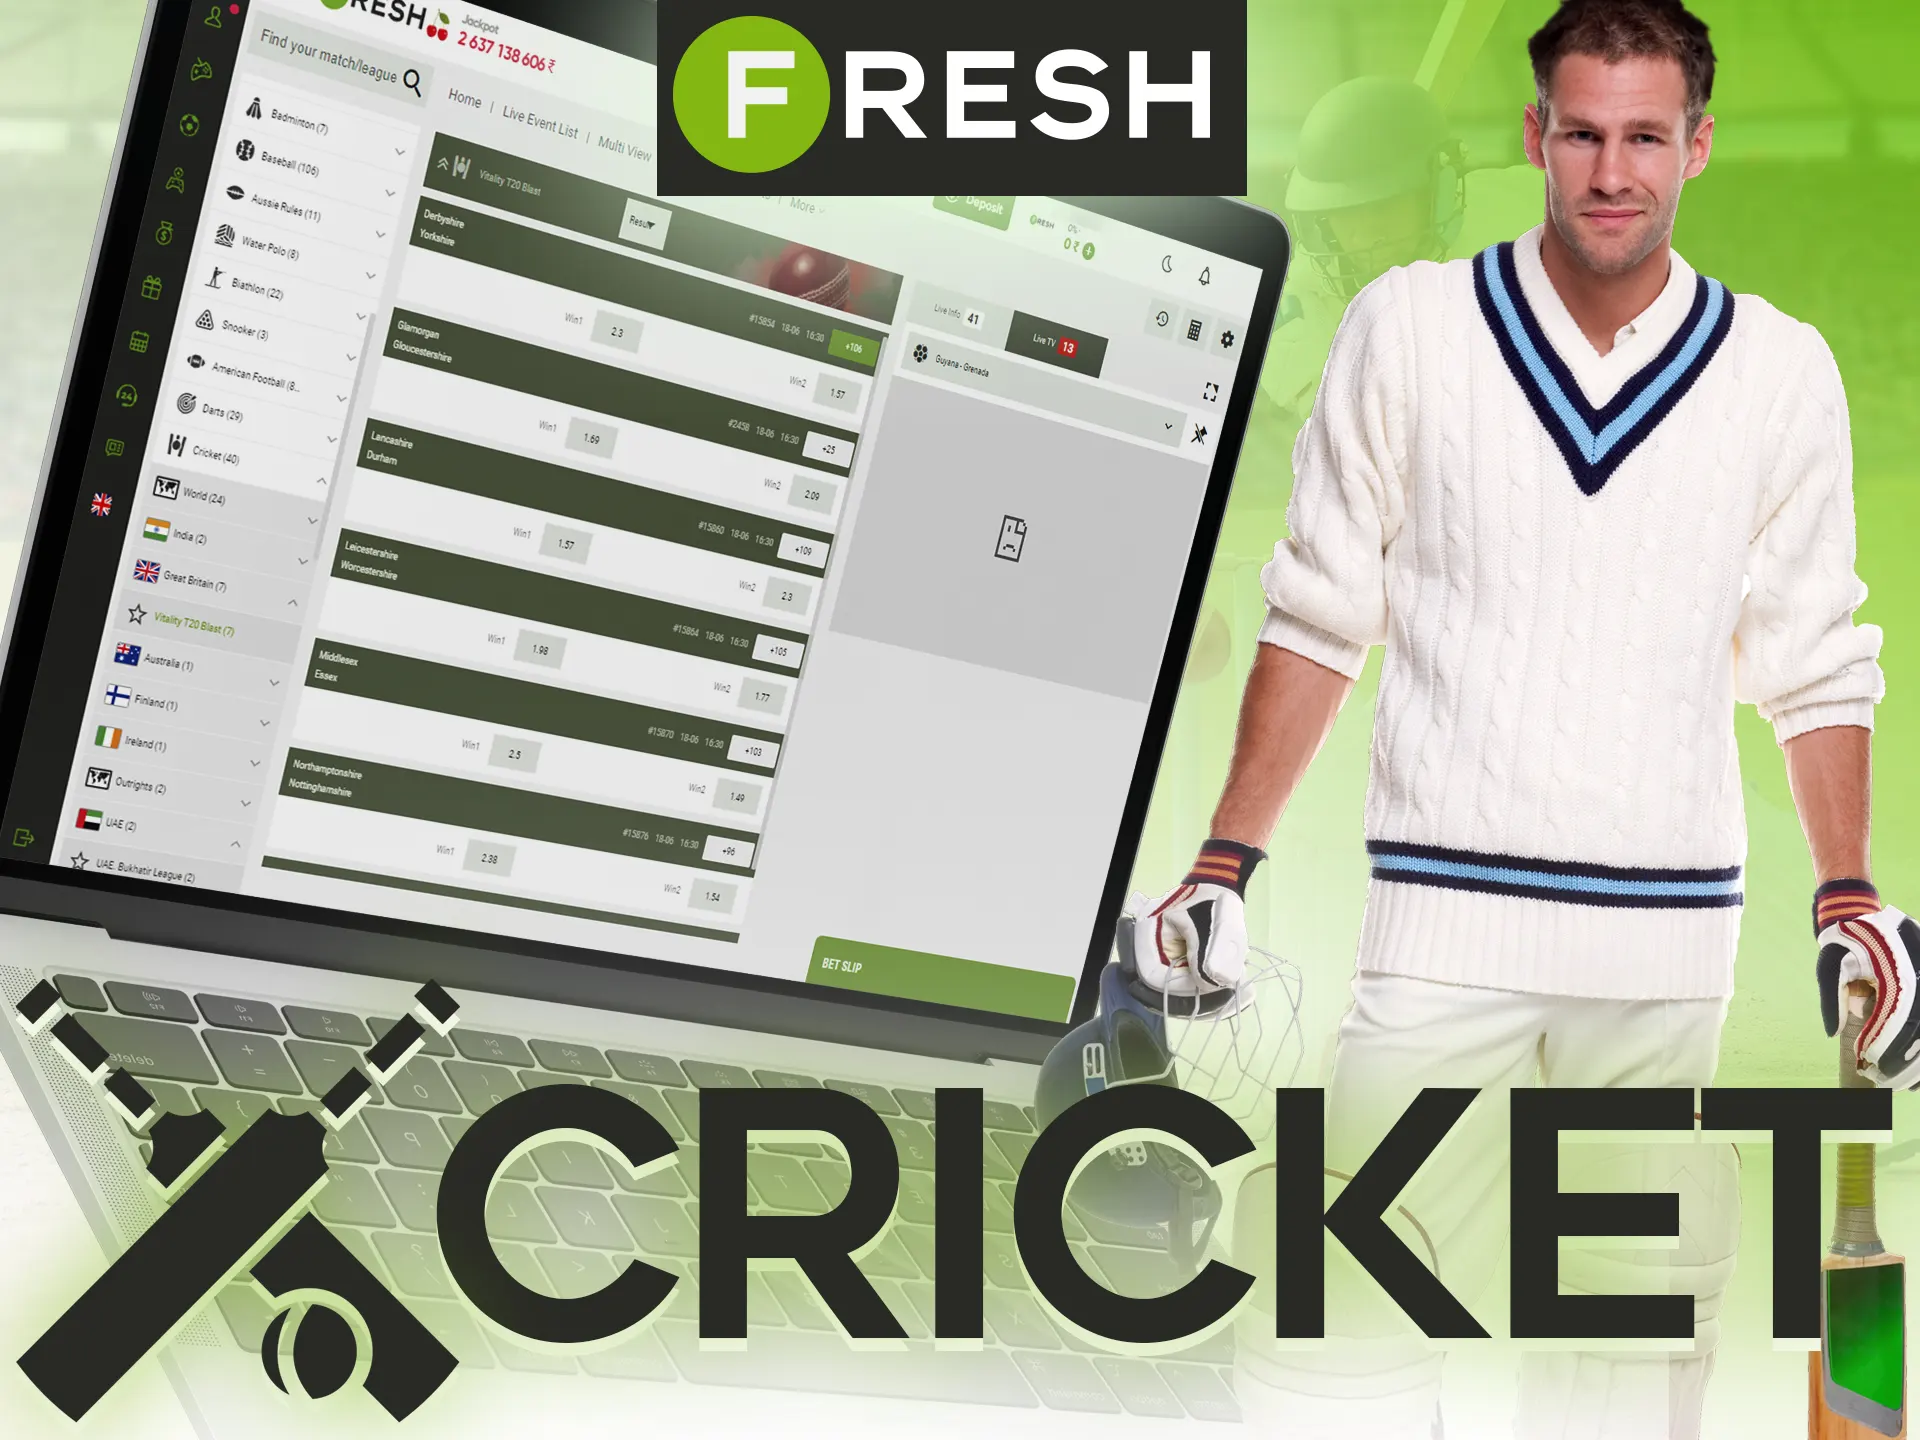 Win money by betting on the most profitable cricket team at the Fresh Casino.